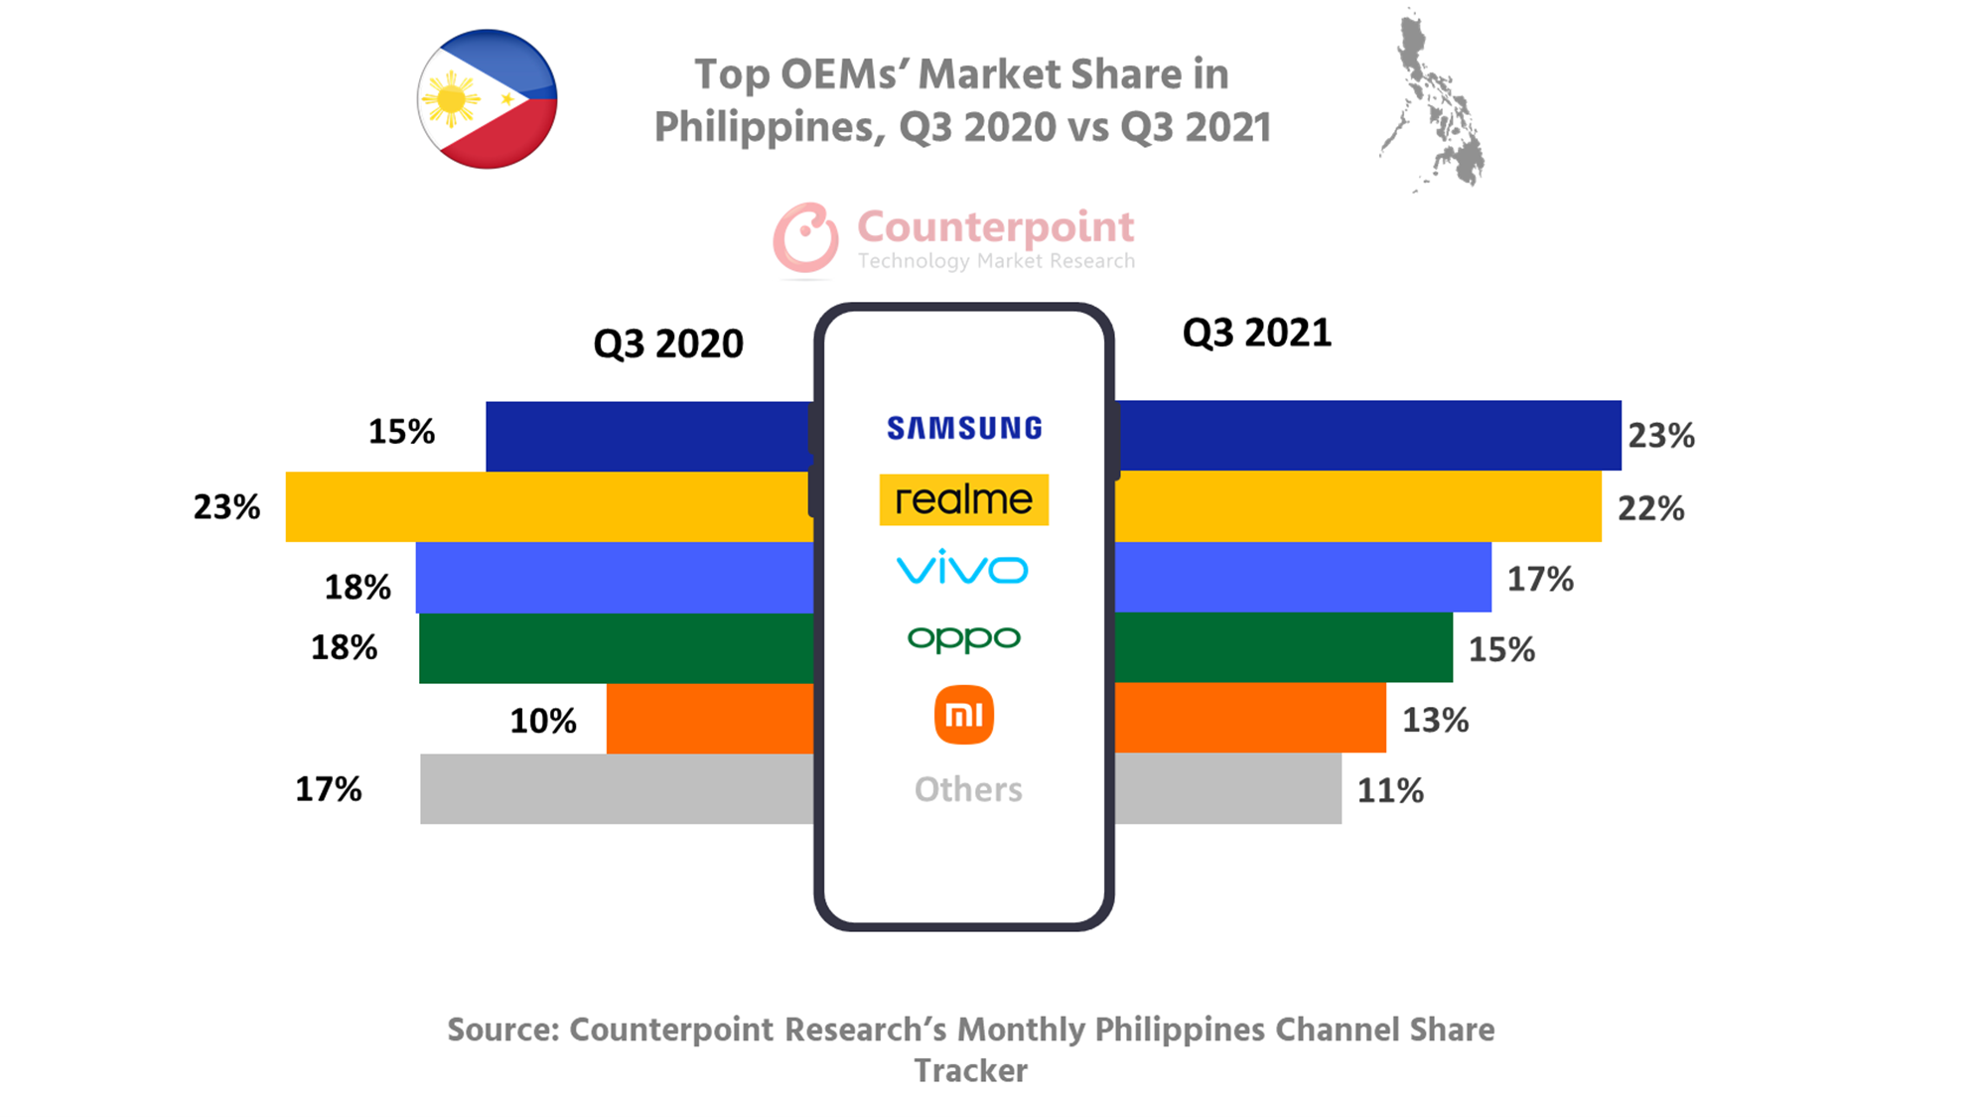 Counterpoint Research Top OEMs’ Market Share in Philippines, Q3 2020 vs Q3 2021